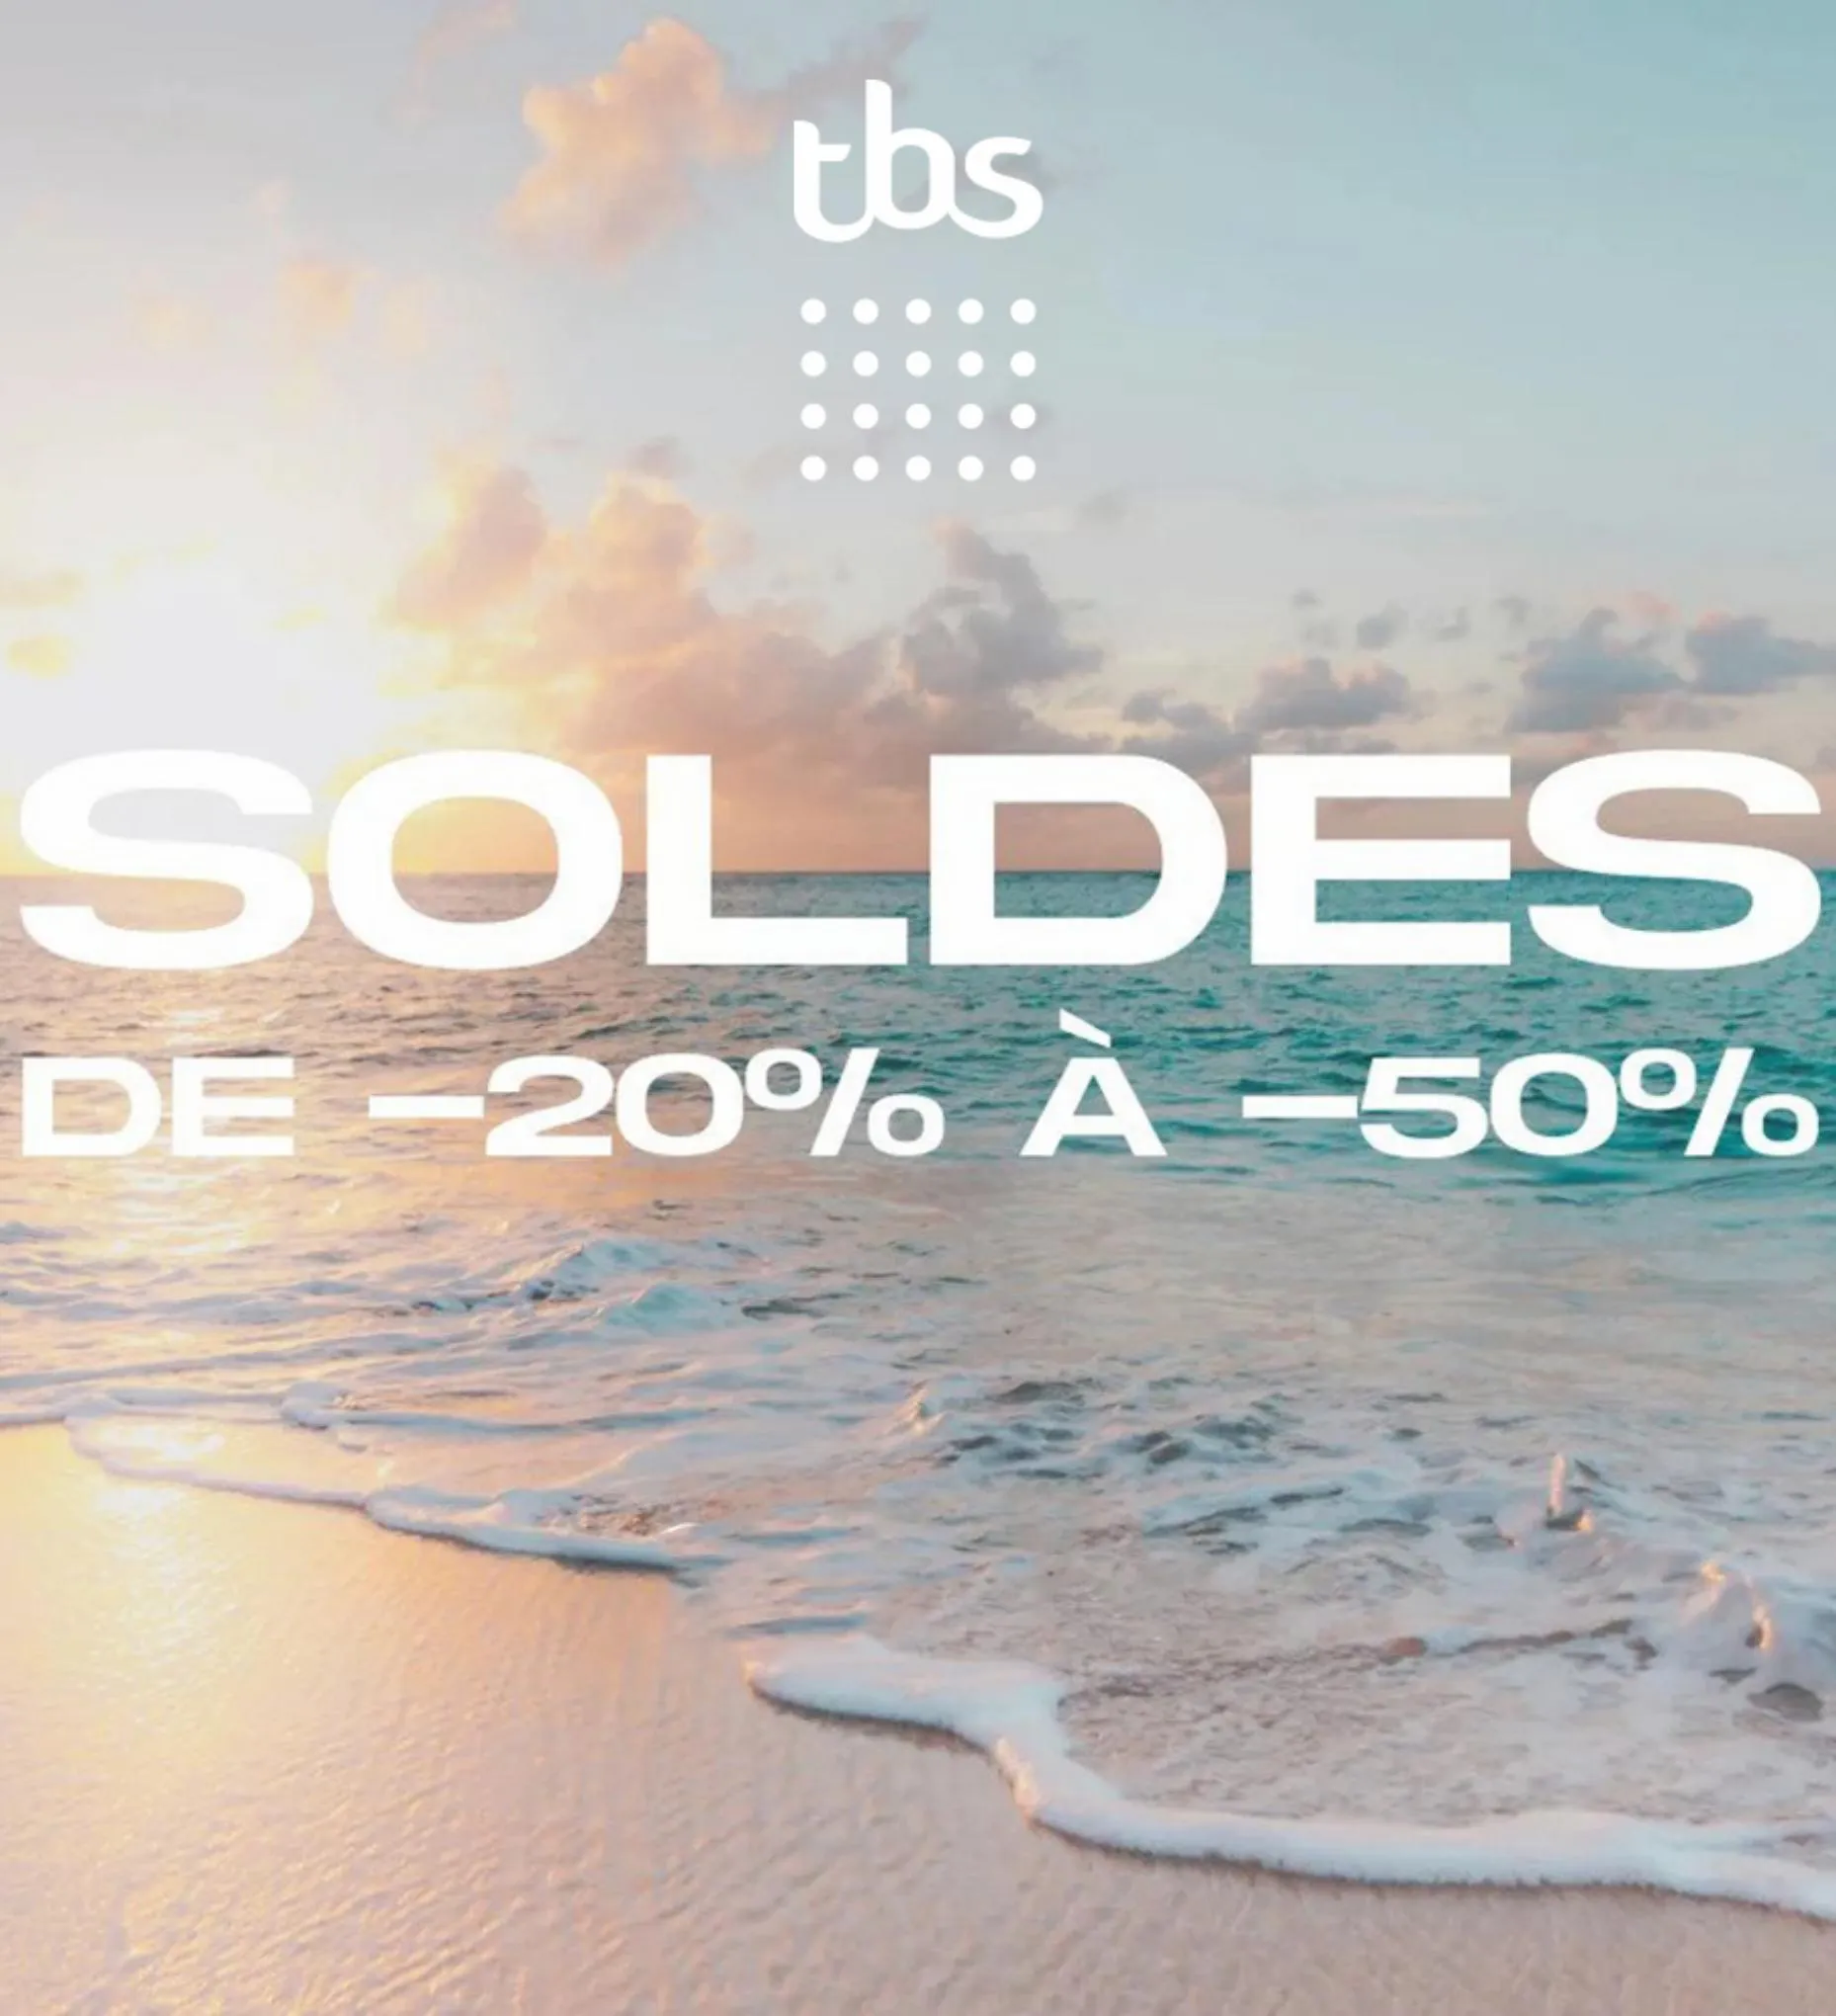 Catalogue SOLDES -20% -50%!, page 00001